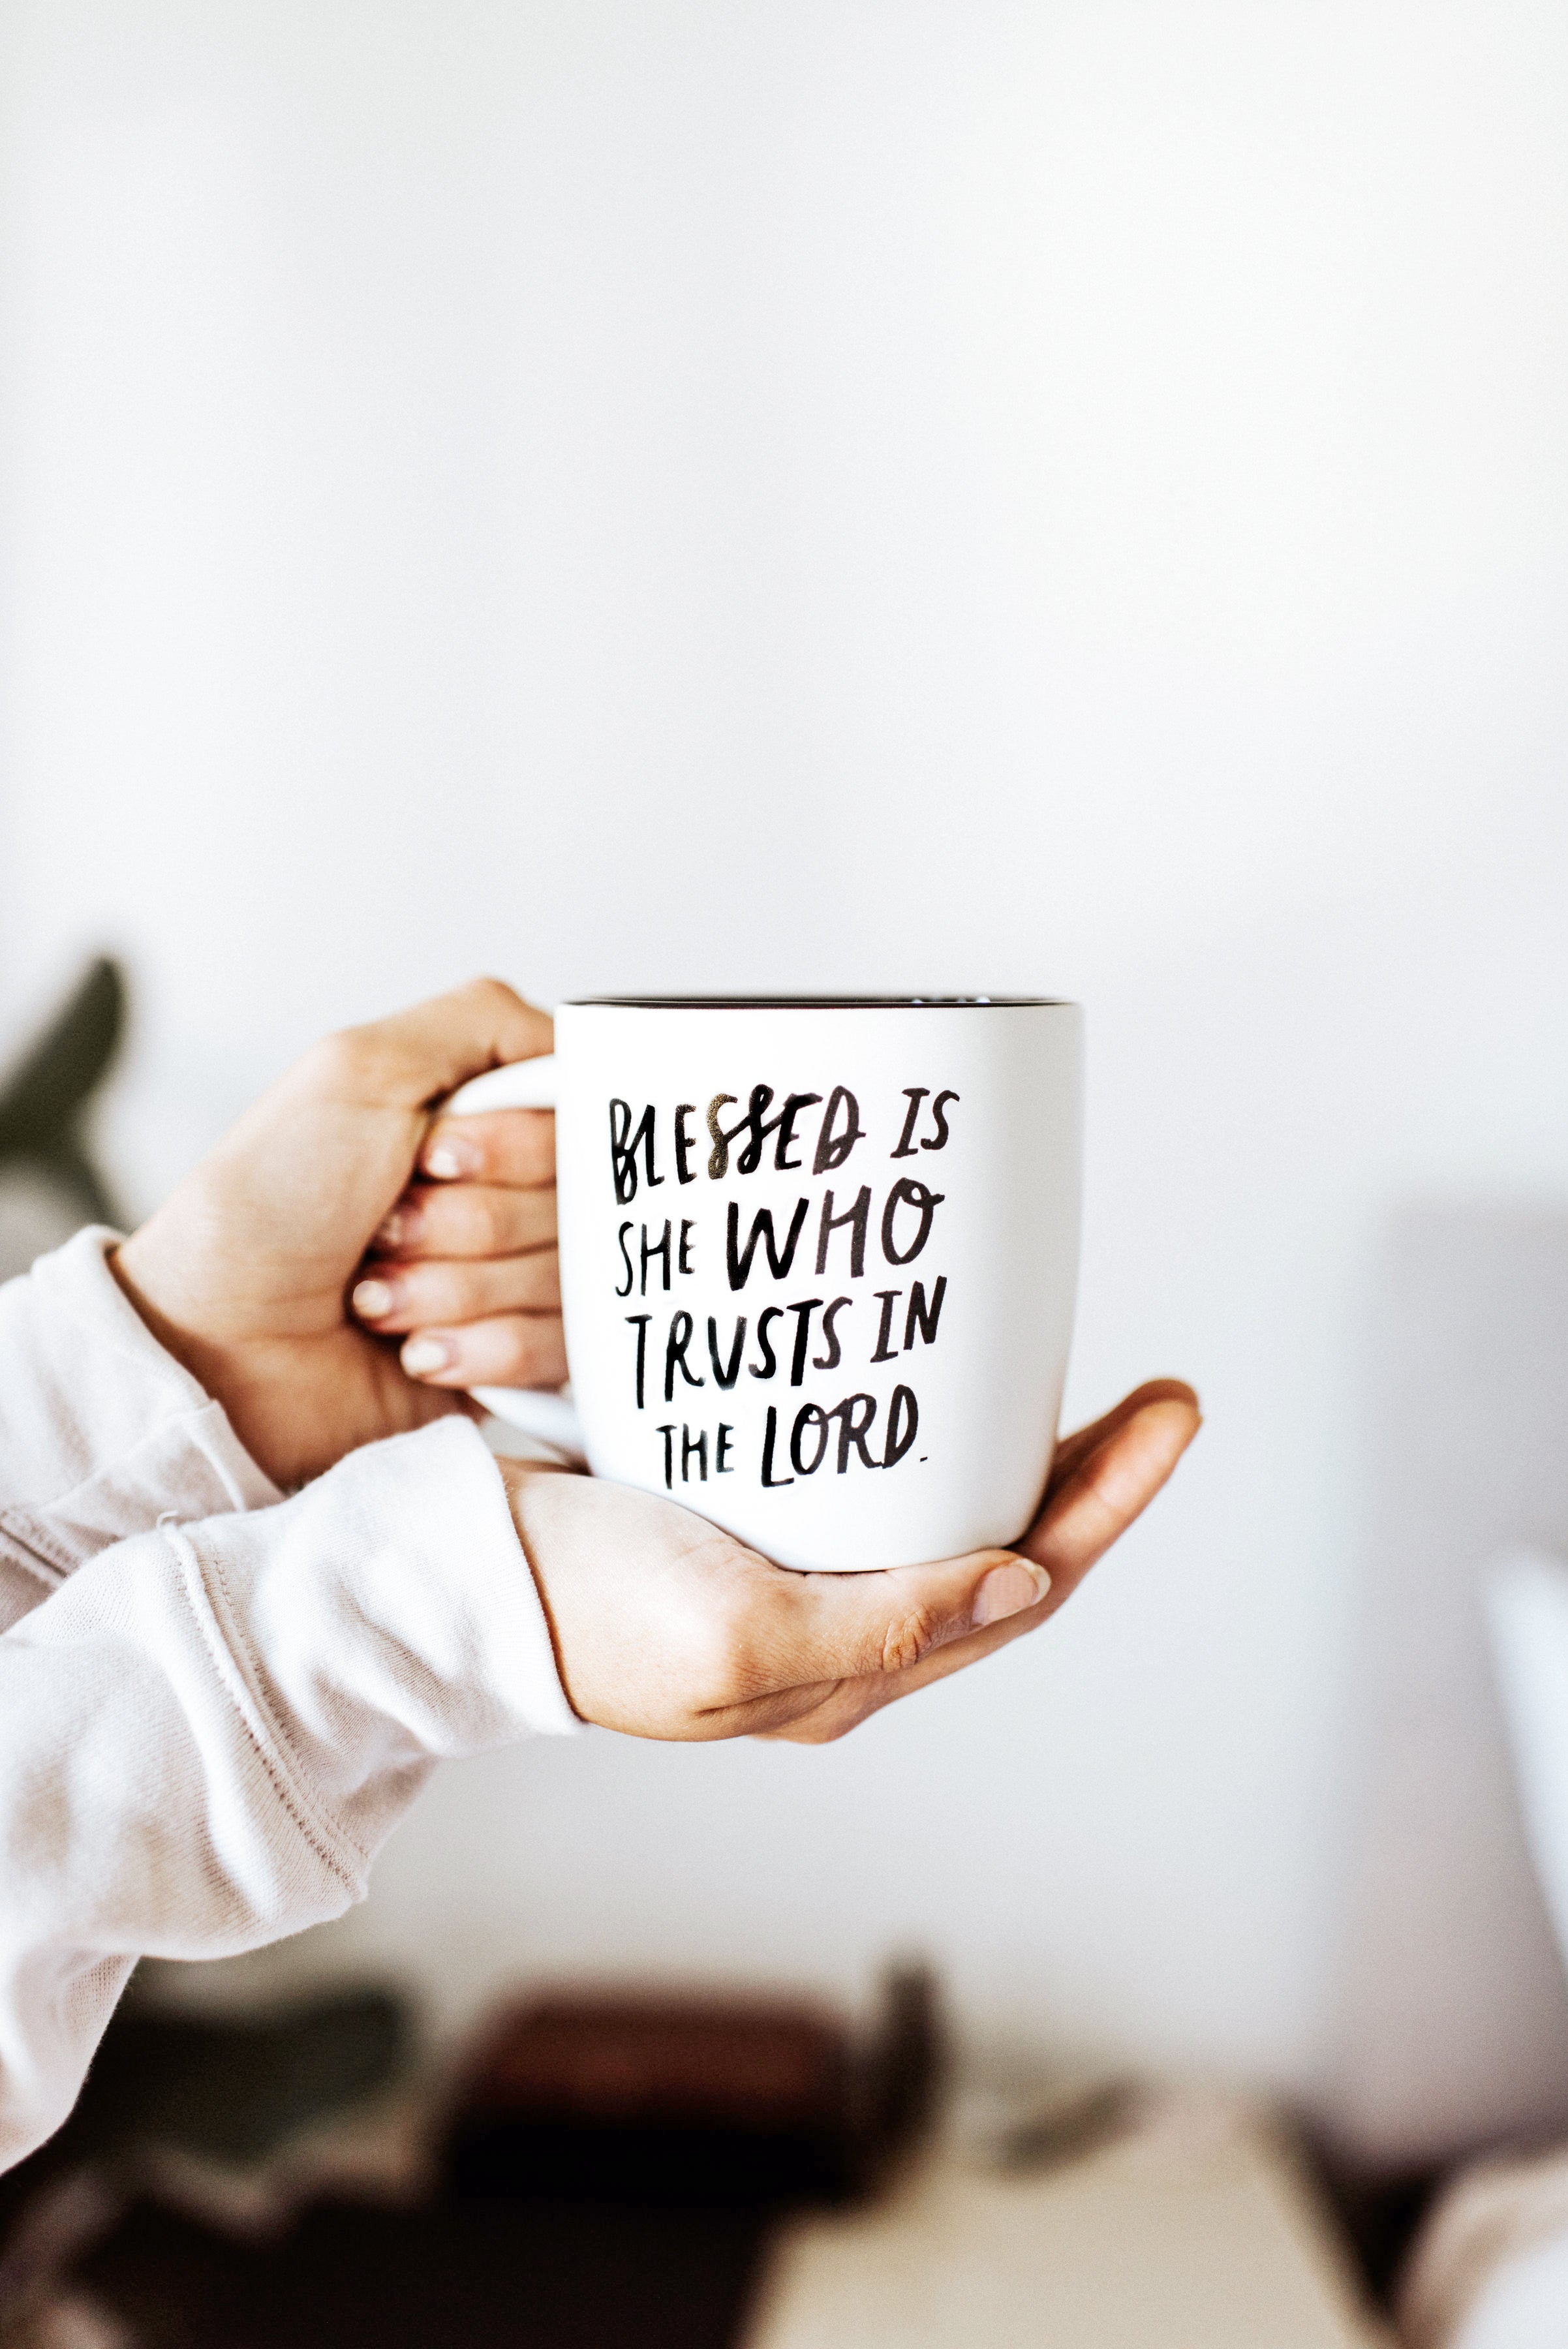 Blessed is she who trusts in the Lord mug